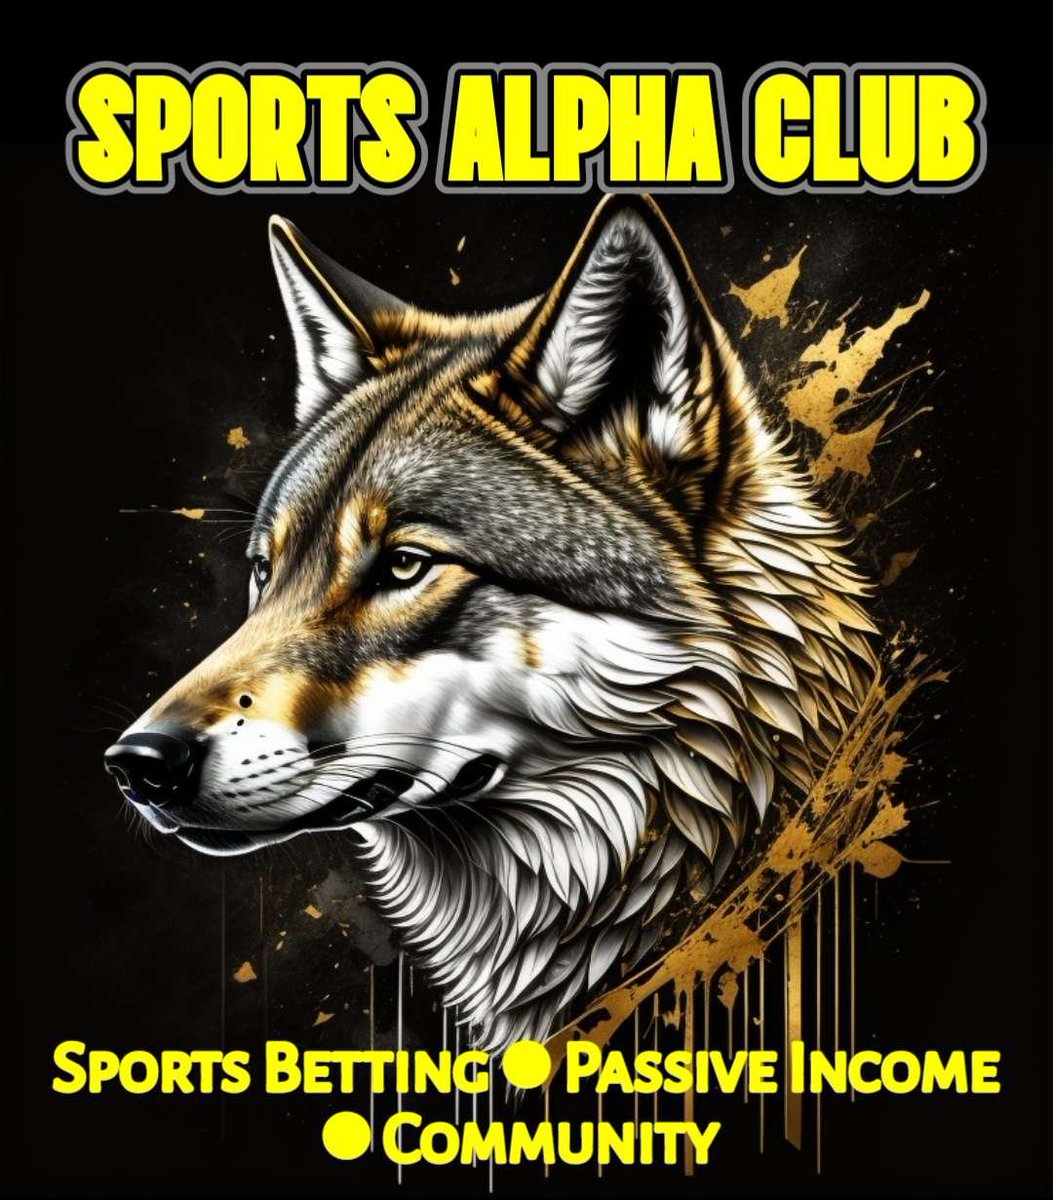 Who's ready for the @SportsAlphaClub upcoming Wolfpack NFT? The Benefits of the Wolfpack NFT: 🪙Wolfpack NFTs provide revenue share opportunity. 🐺Guaranteed mint of $ALPHA token. 🎁2 Airdrops of $ALPHA tokens to Wolfpack holders 🎨Anthony, @Rudy_Tops_CNFT will be the artist!